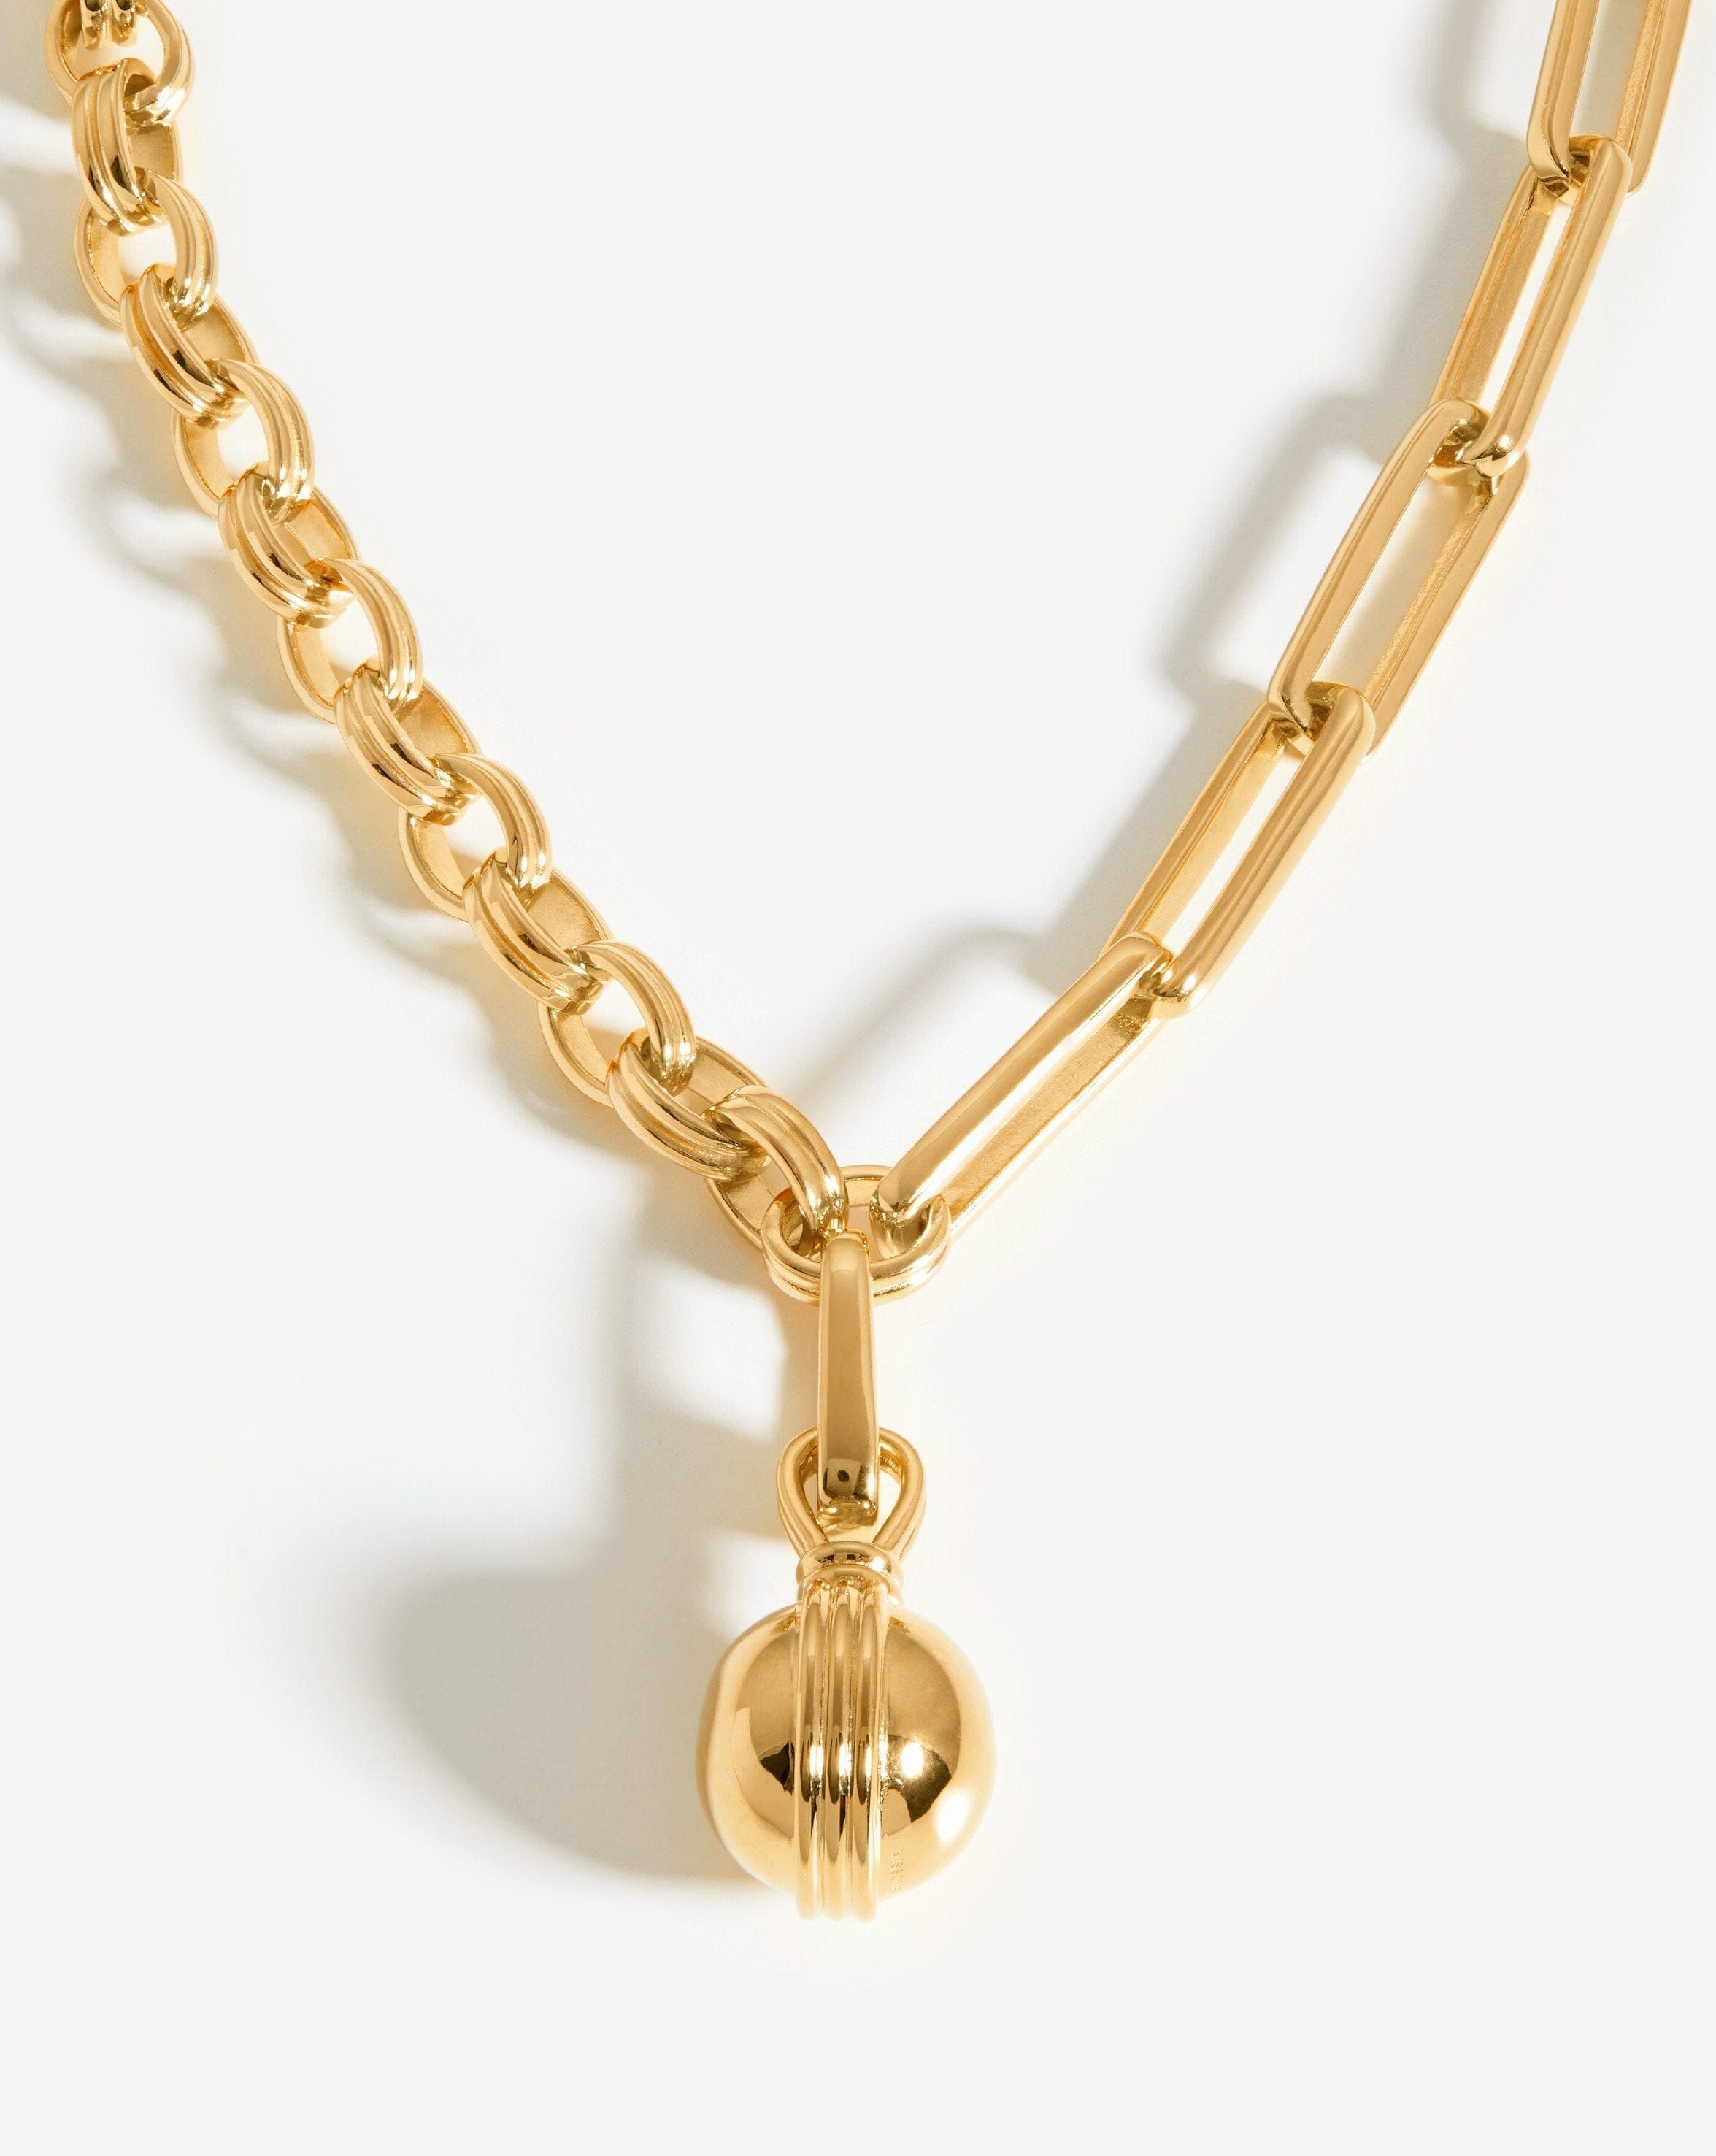 Deconstructed Axiom Small Sphere Chain Necklace | 18ct Gold Plated ...